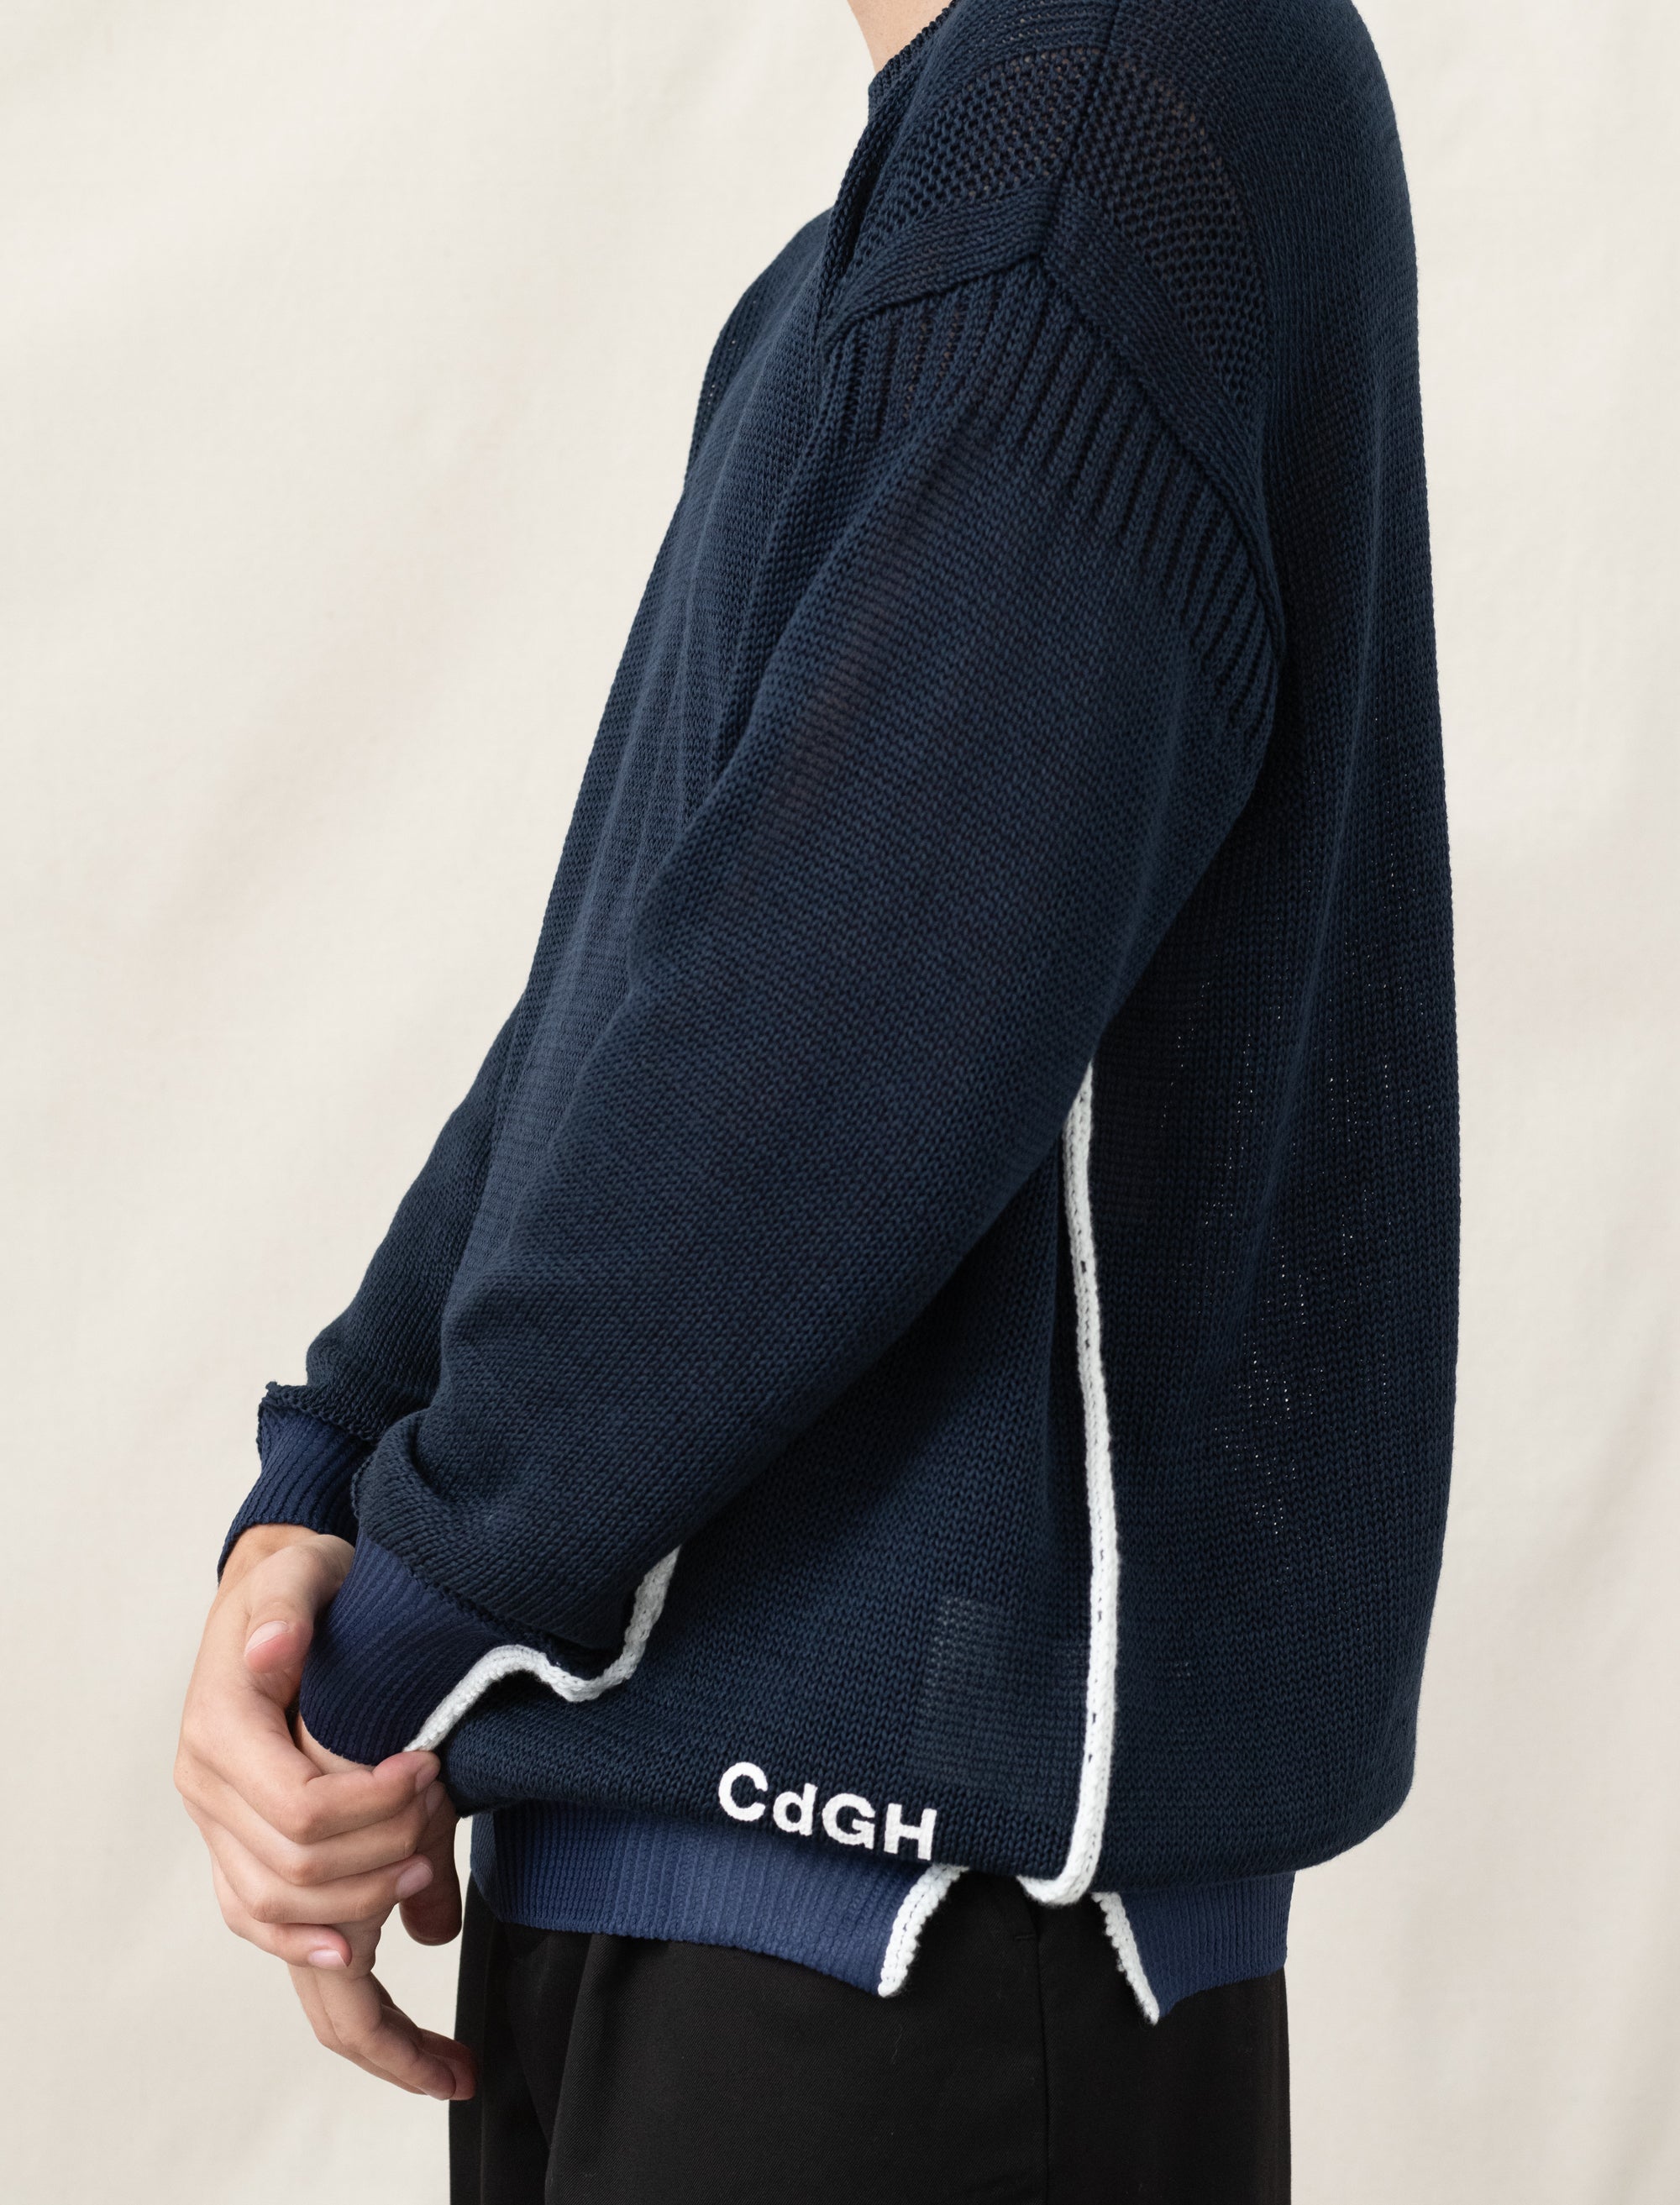 Cotton/Poly Sweater (Navy)